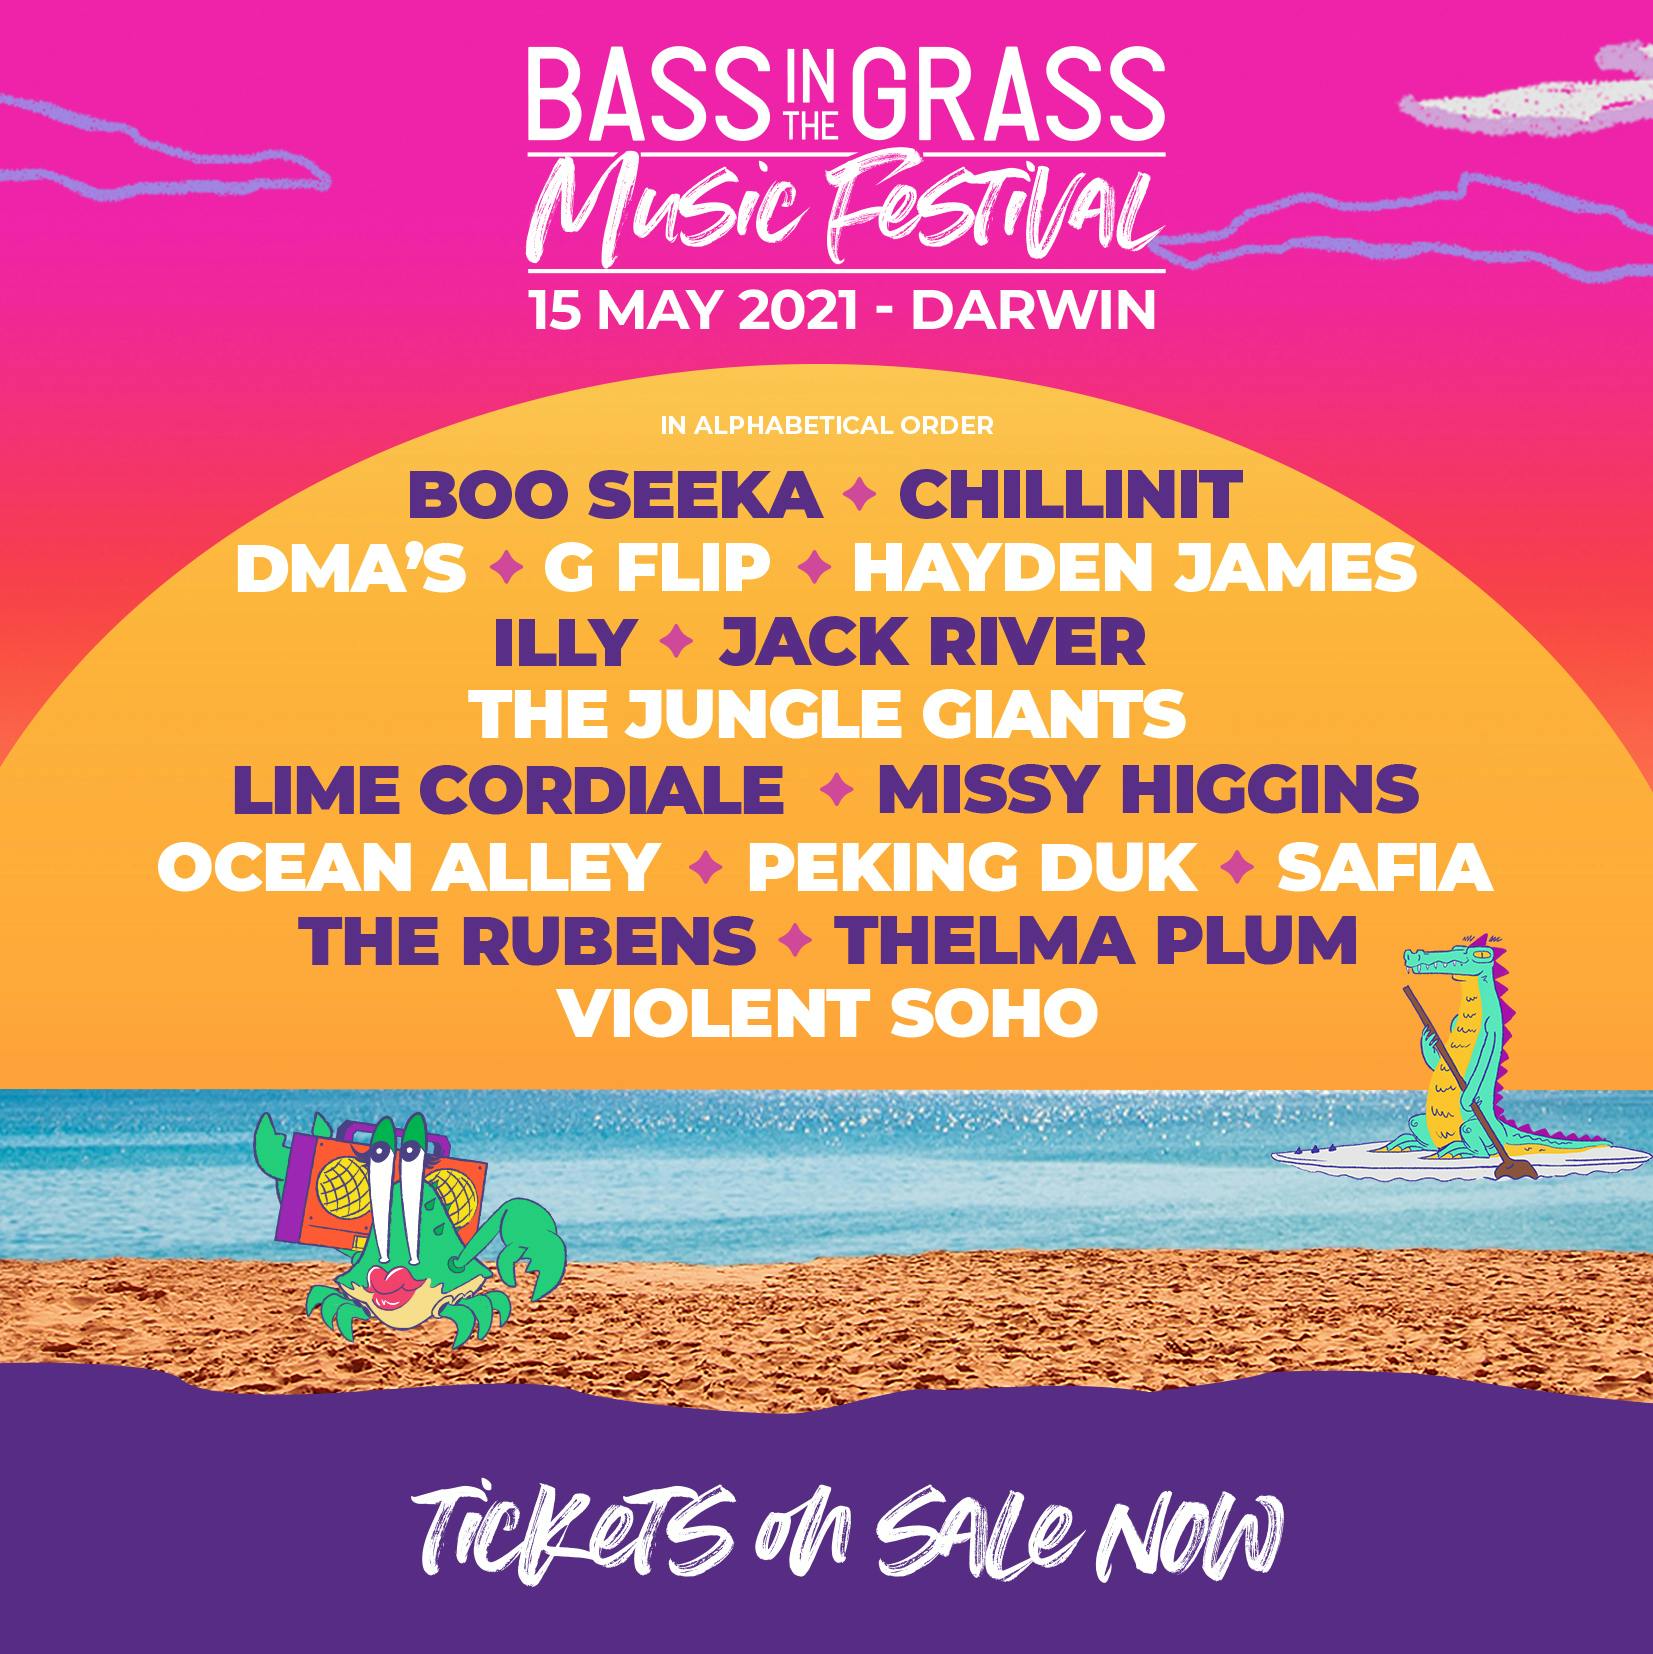 The BASSINTHEGRASS line-up is Boo Seeka, ChillinIT, DMA'S, G Flip, Hayden James, ILLY, Jack River, The Jungle Giants, Lime Cordiale, Missy Higgins, Ocean Alley, Peking Duk, SAFIA, The Rubens, Thelma Plum and Violent Soho